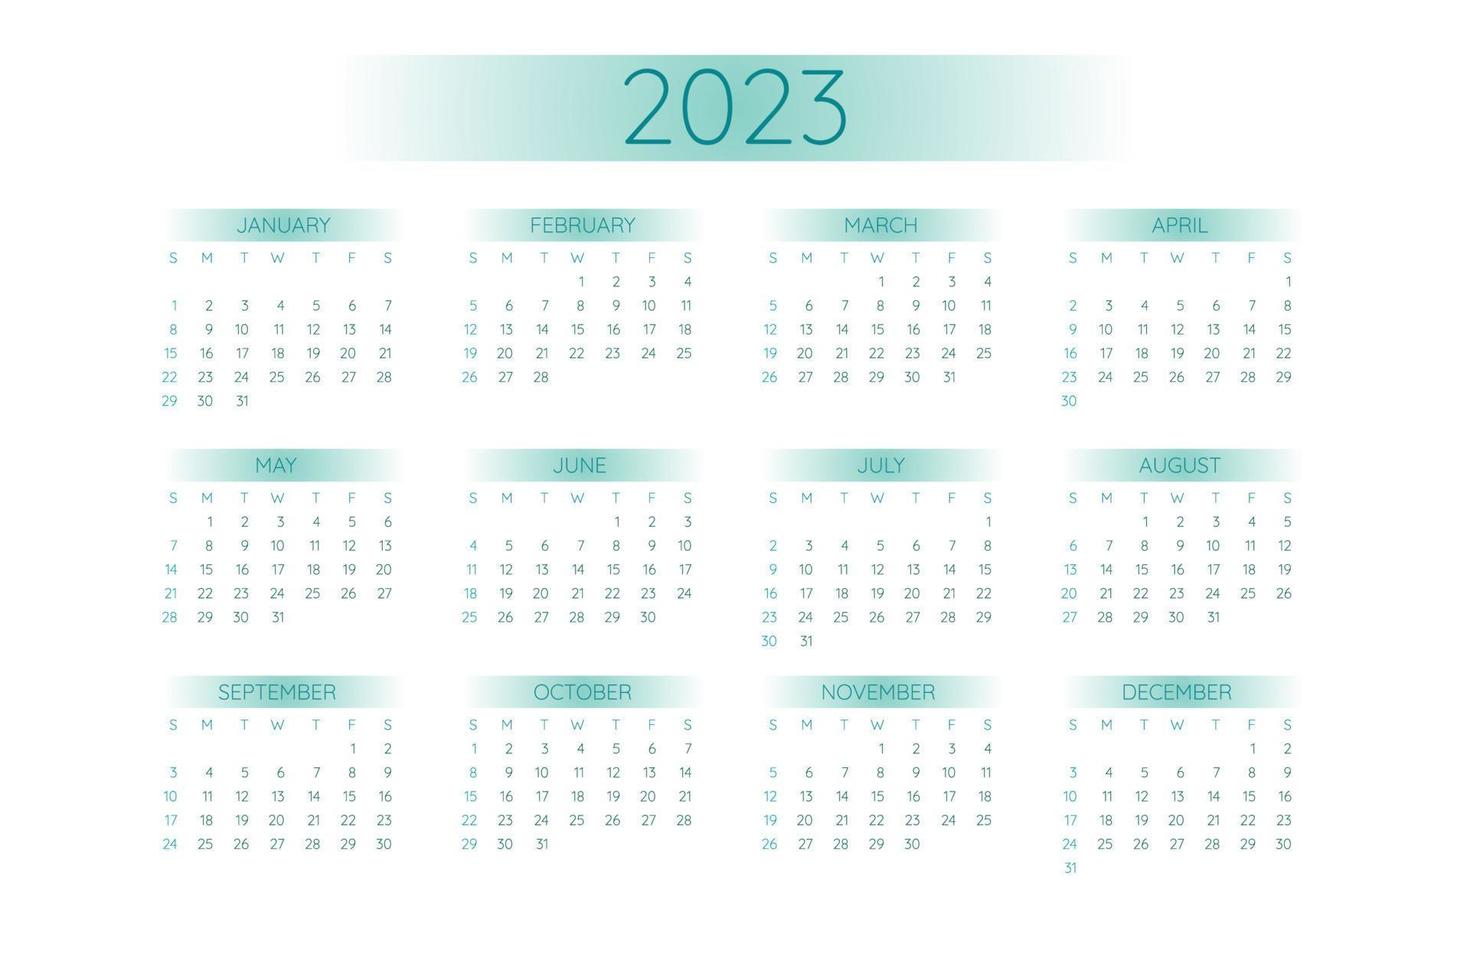 2023 Pocket Calendar Template In Strict Minimalistic Style With Teal